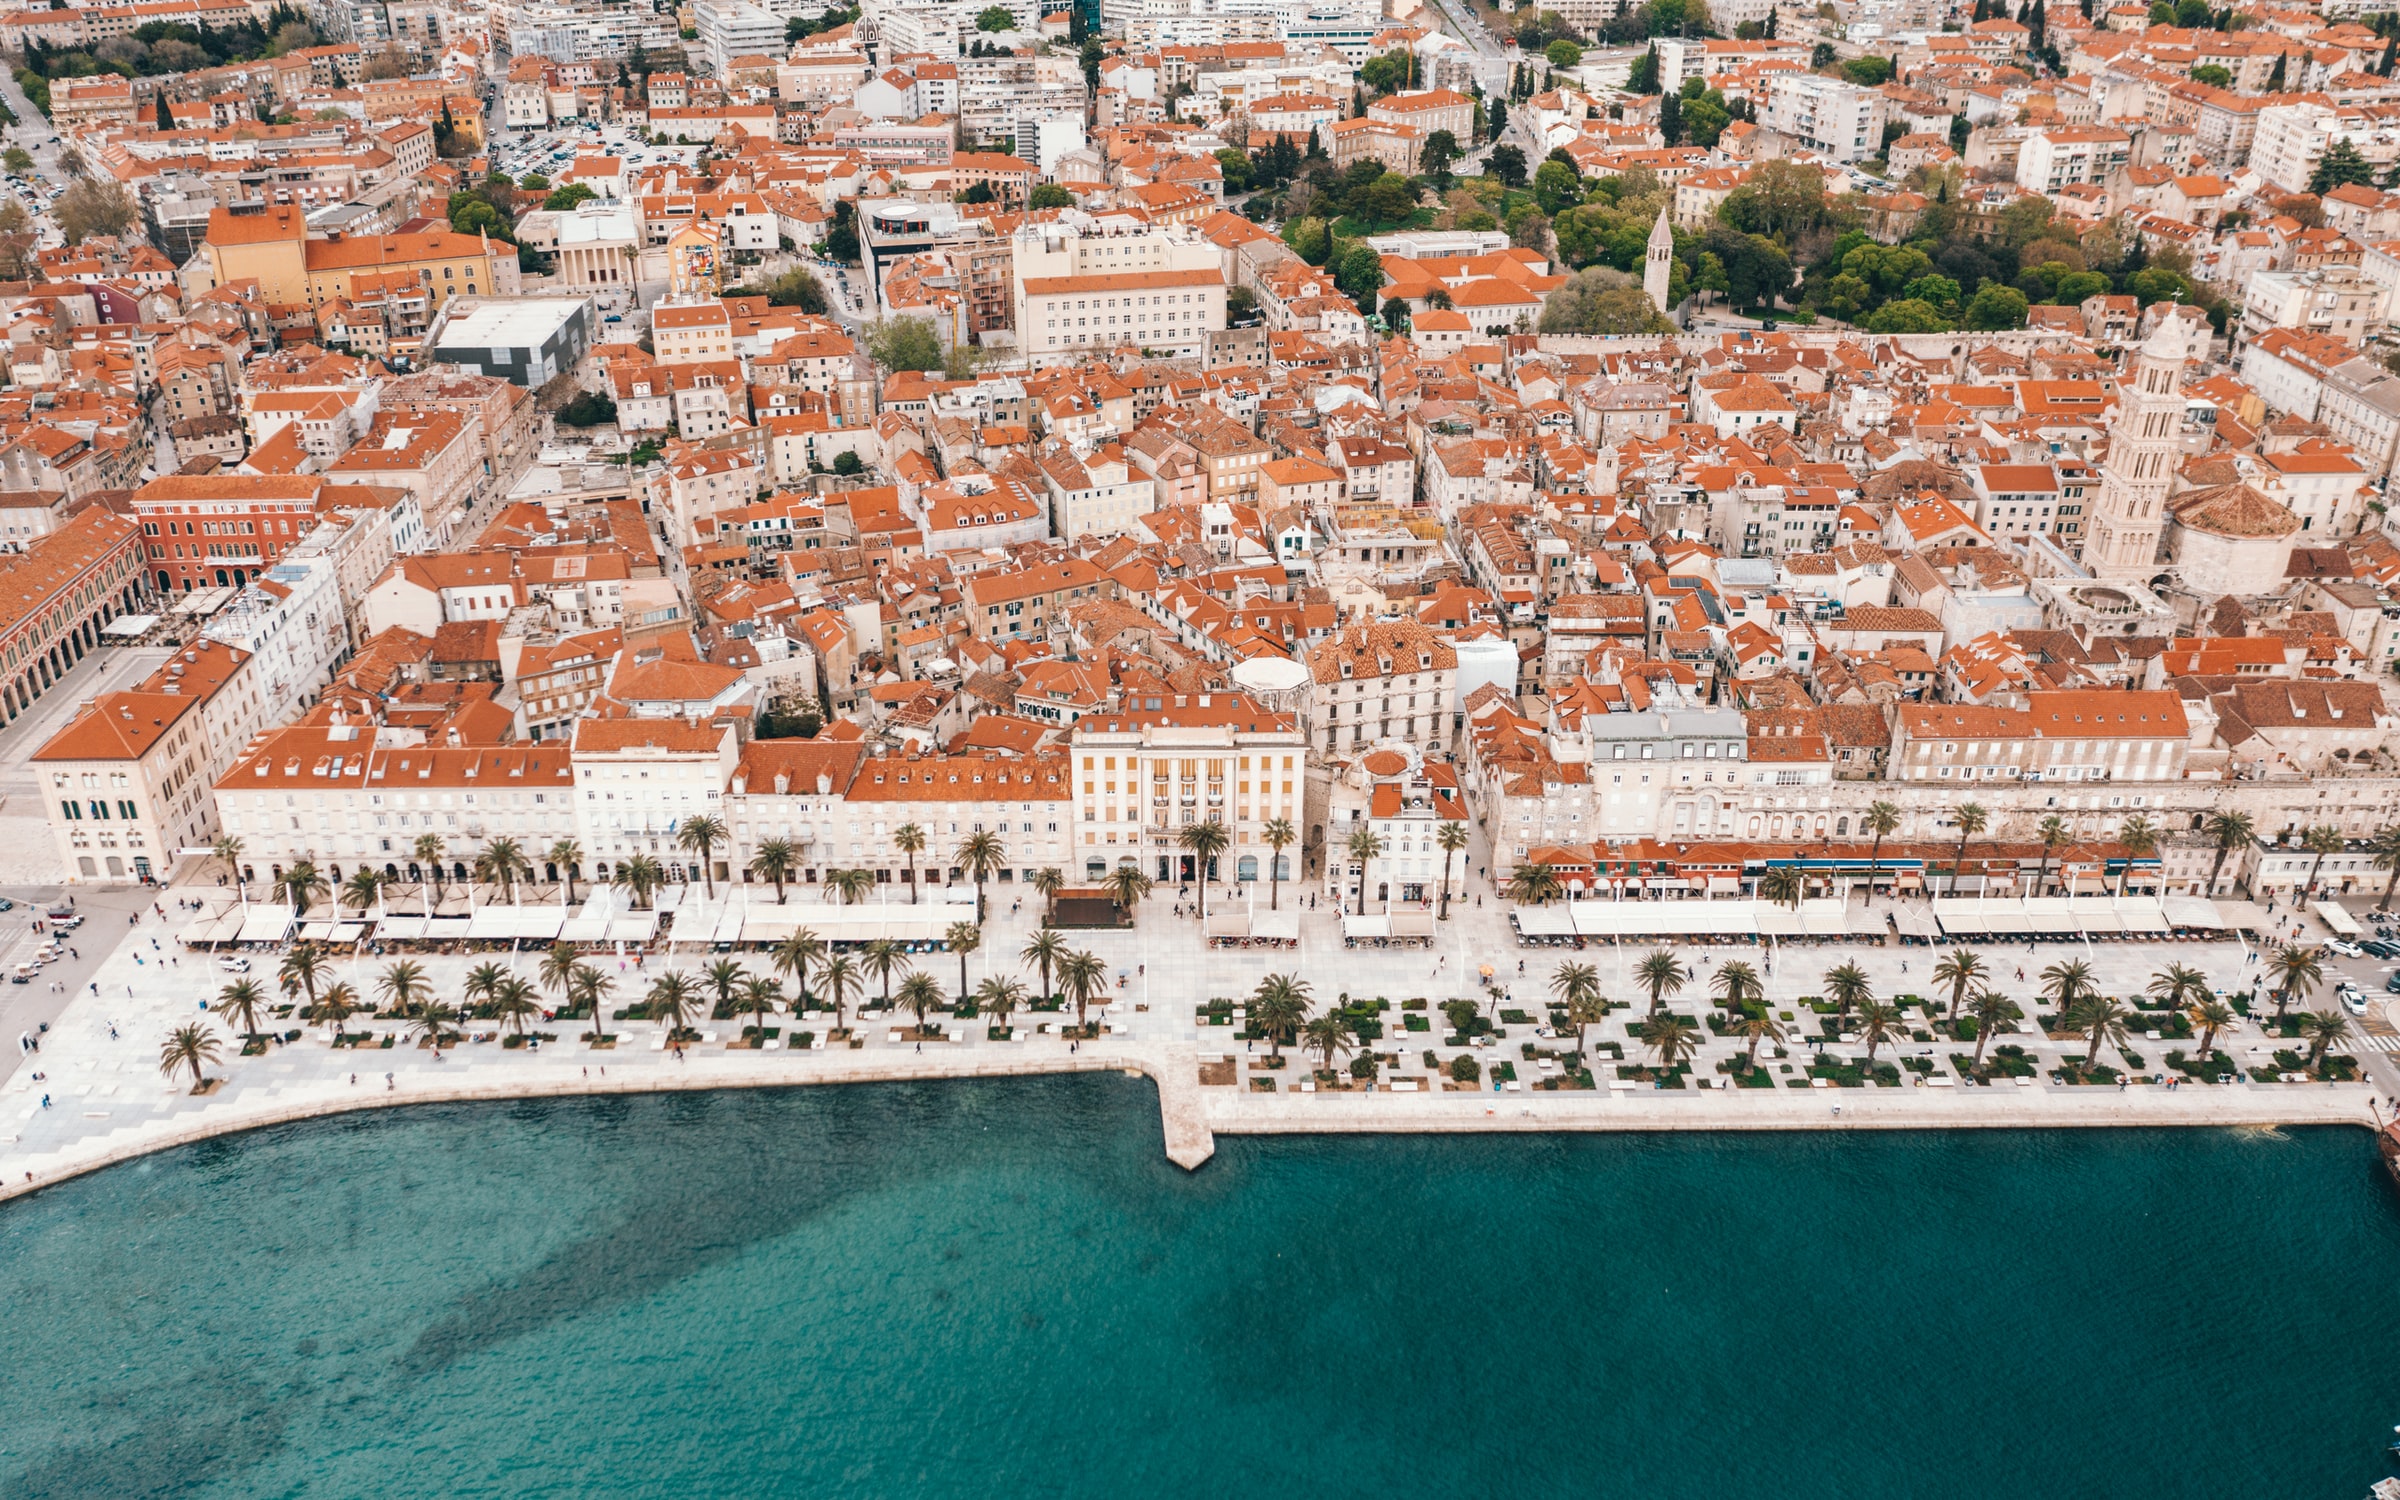 Top things to do in Split